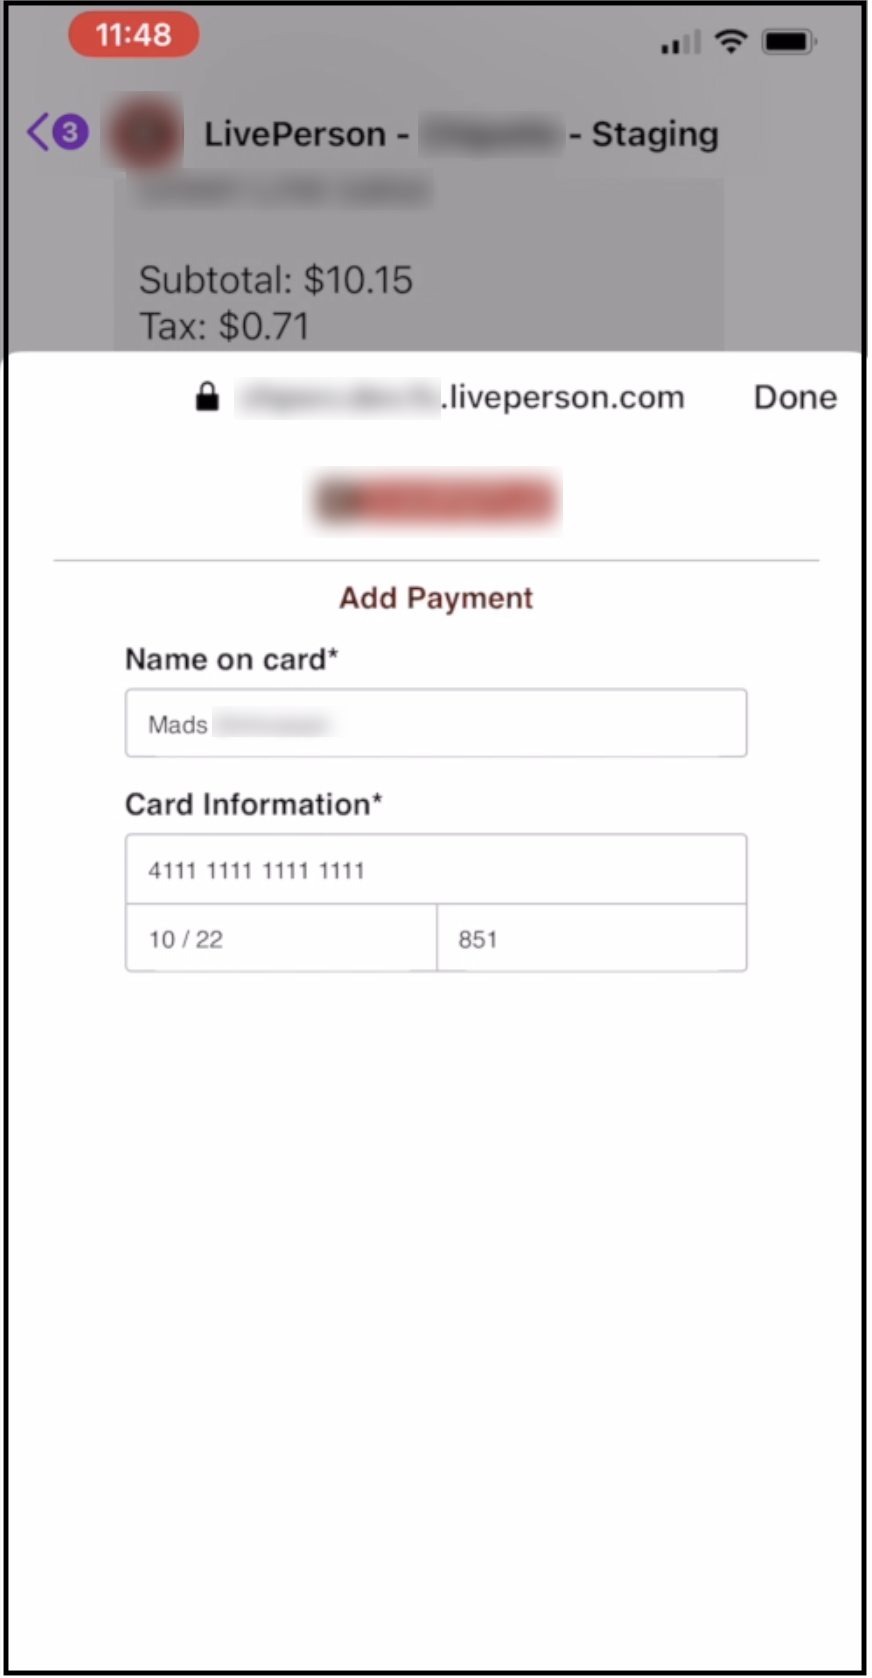 The experience of entering credit card info as a consumer